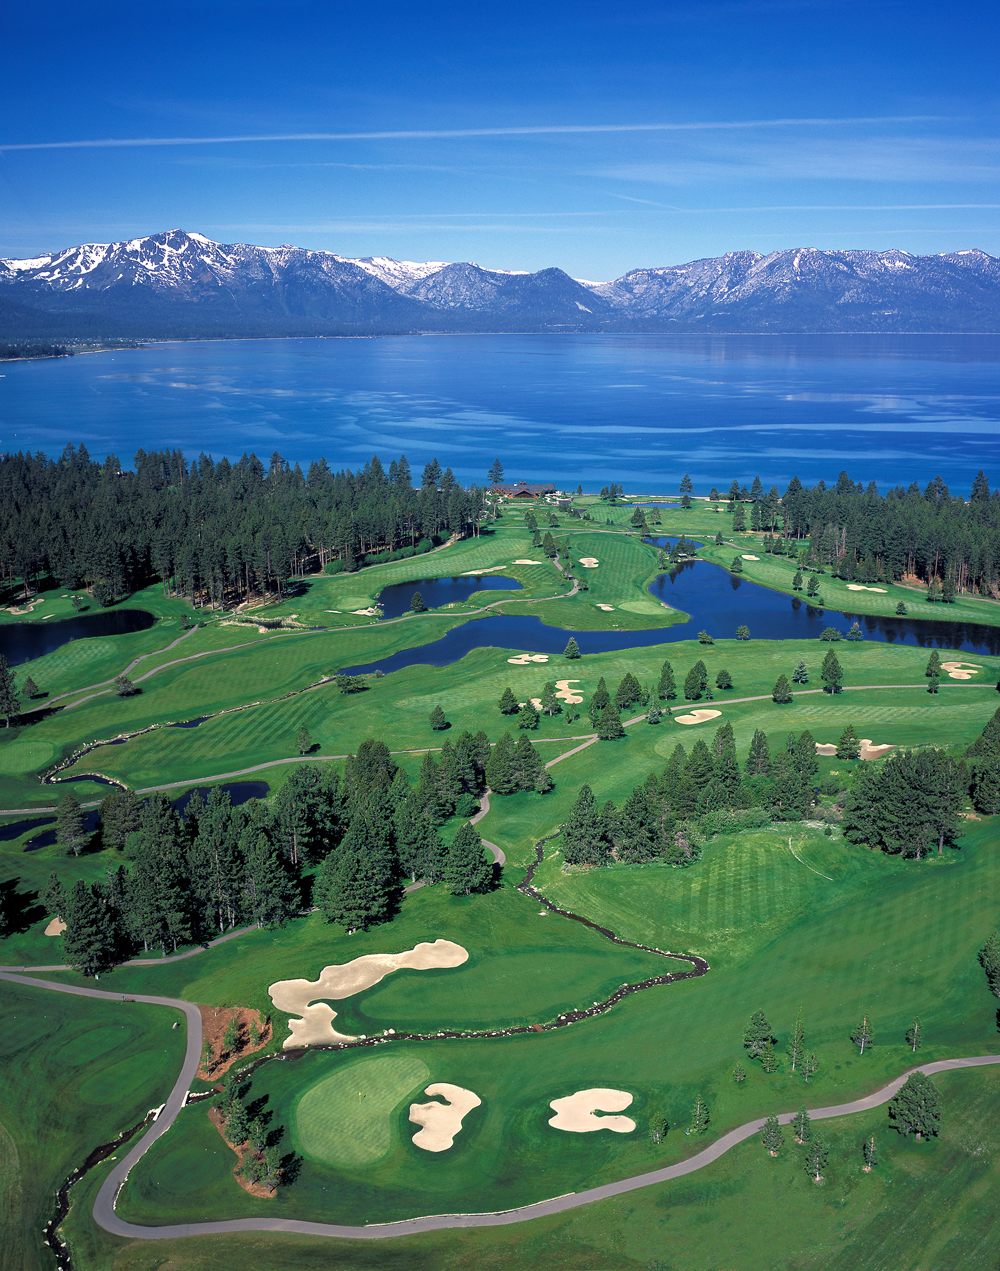 Next door to The Landing, Edgewood Golf Course offers golfing along the shores of Lake Tahoe.